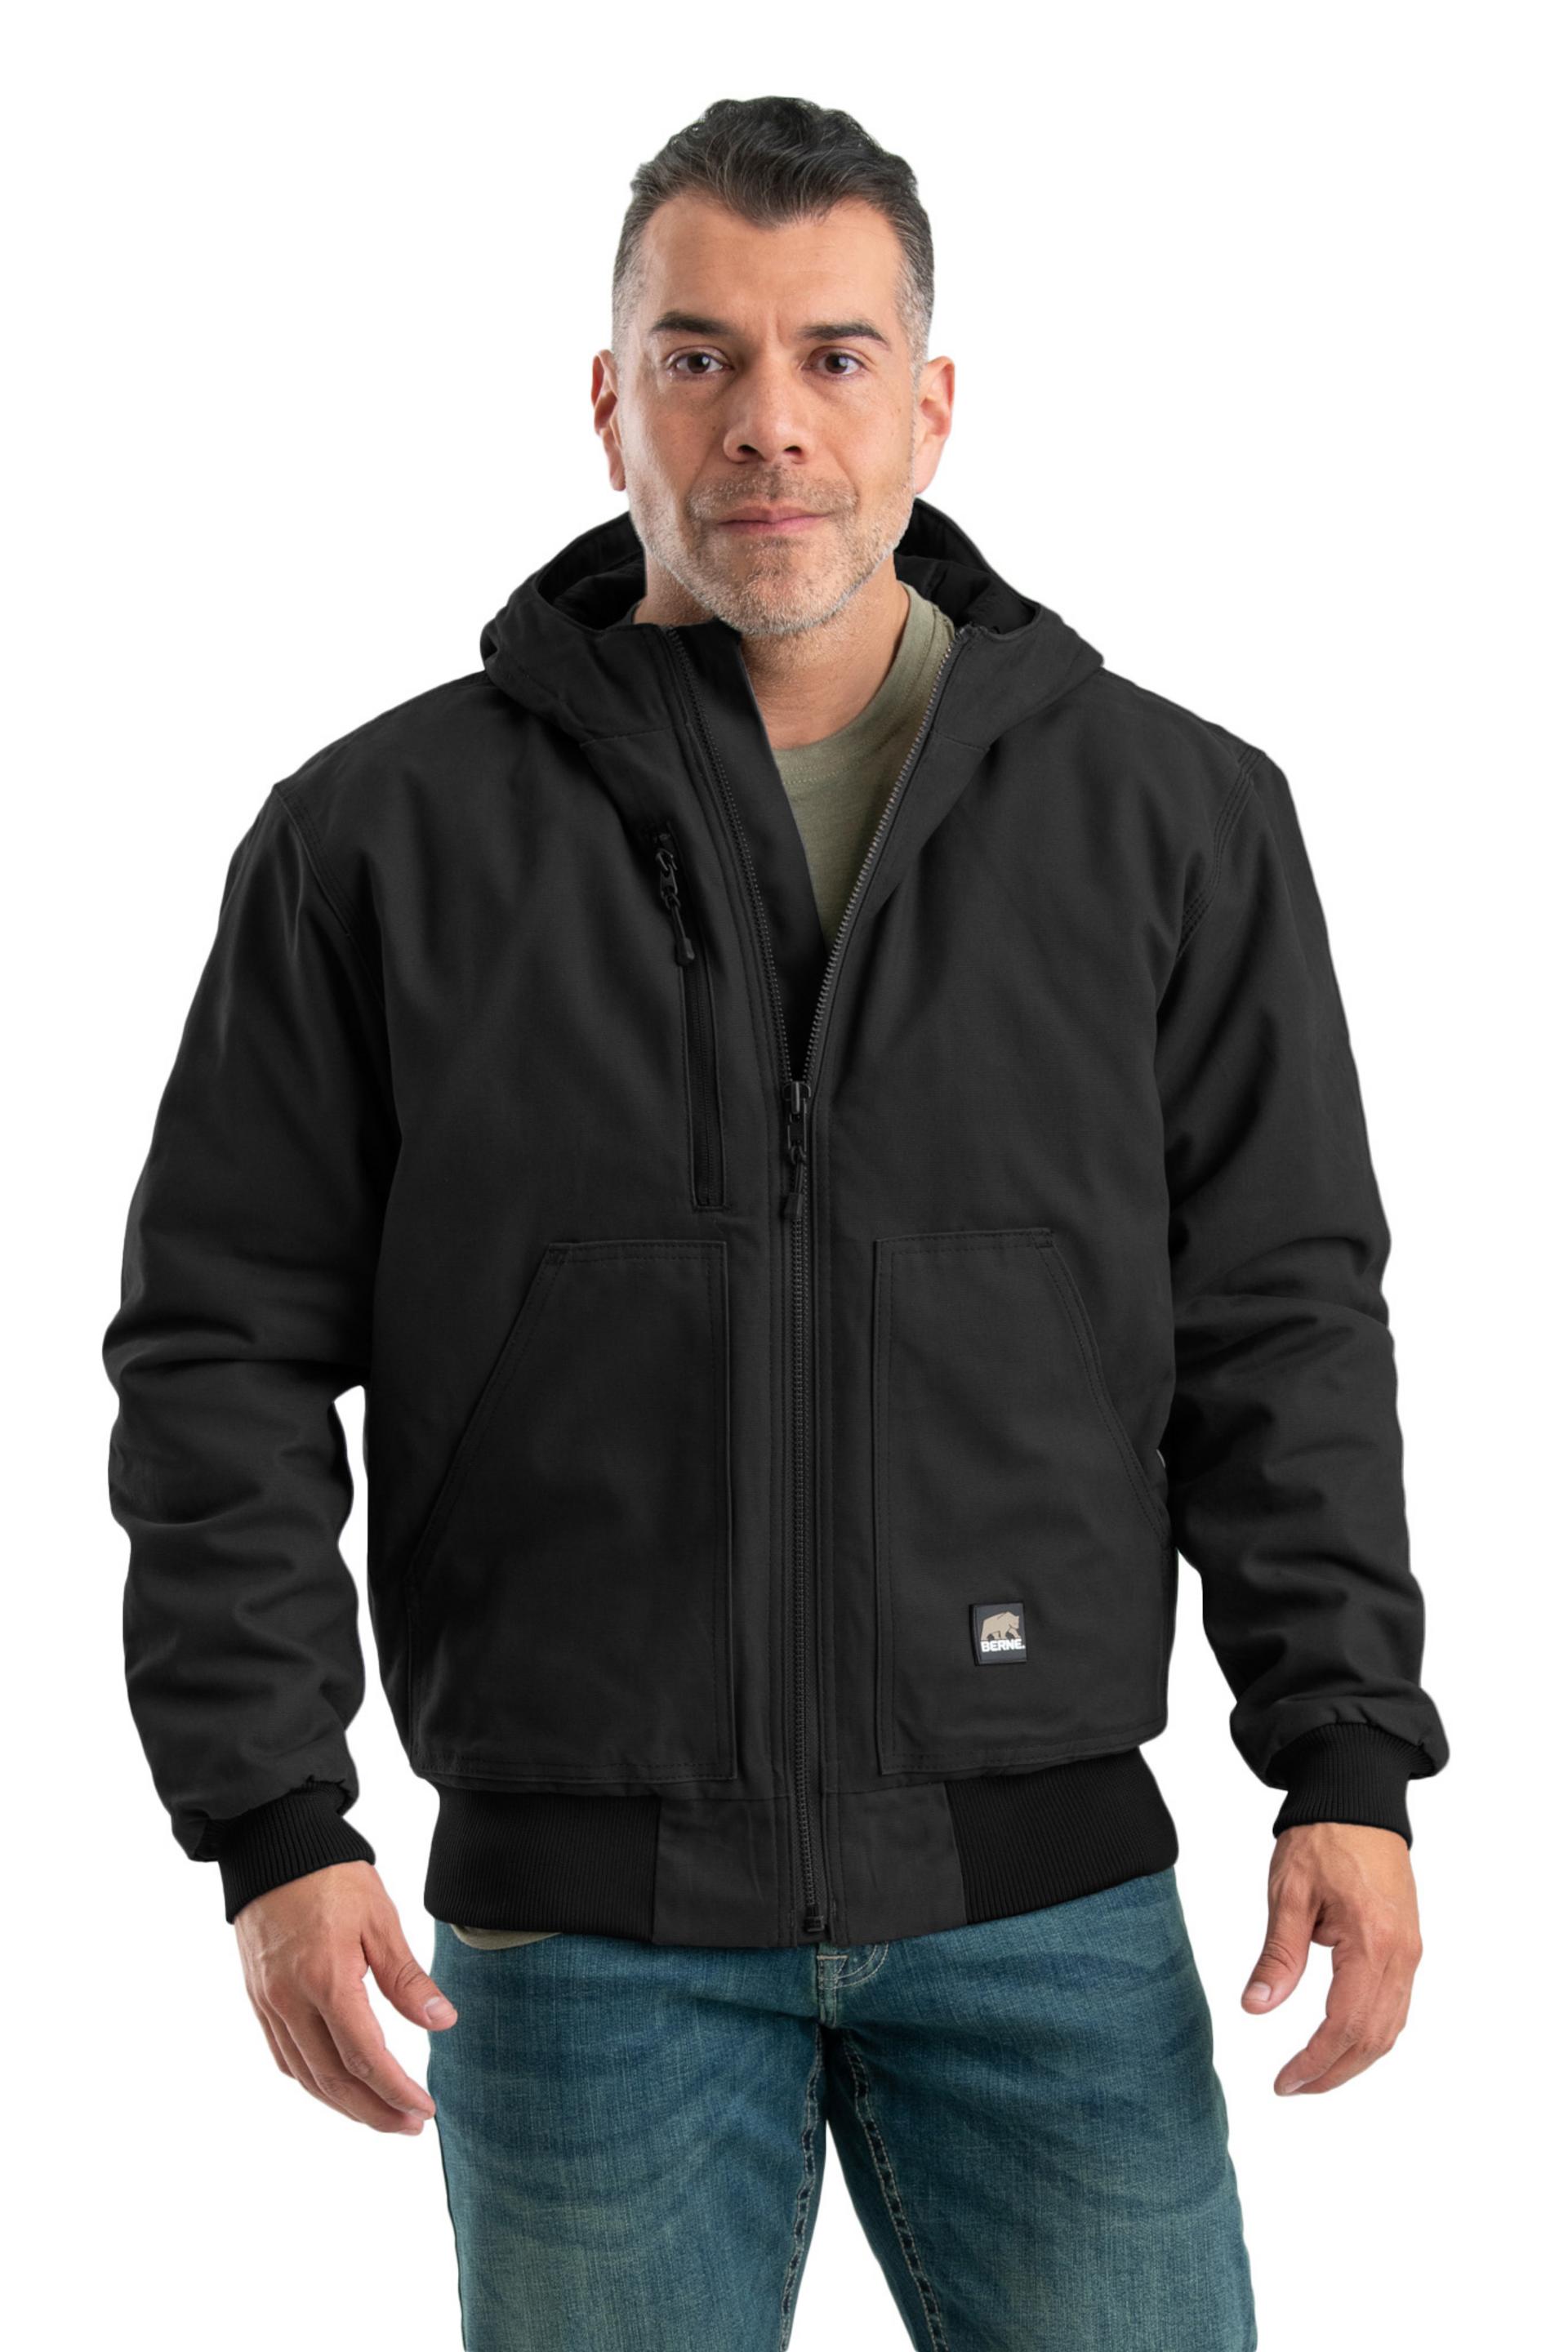 Highland Duck Hooded Active Jacket